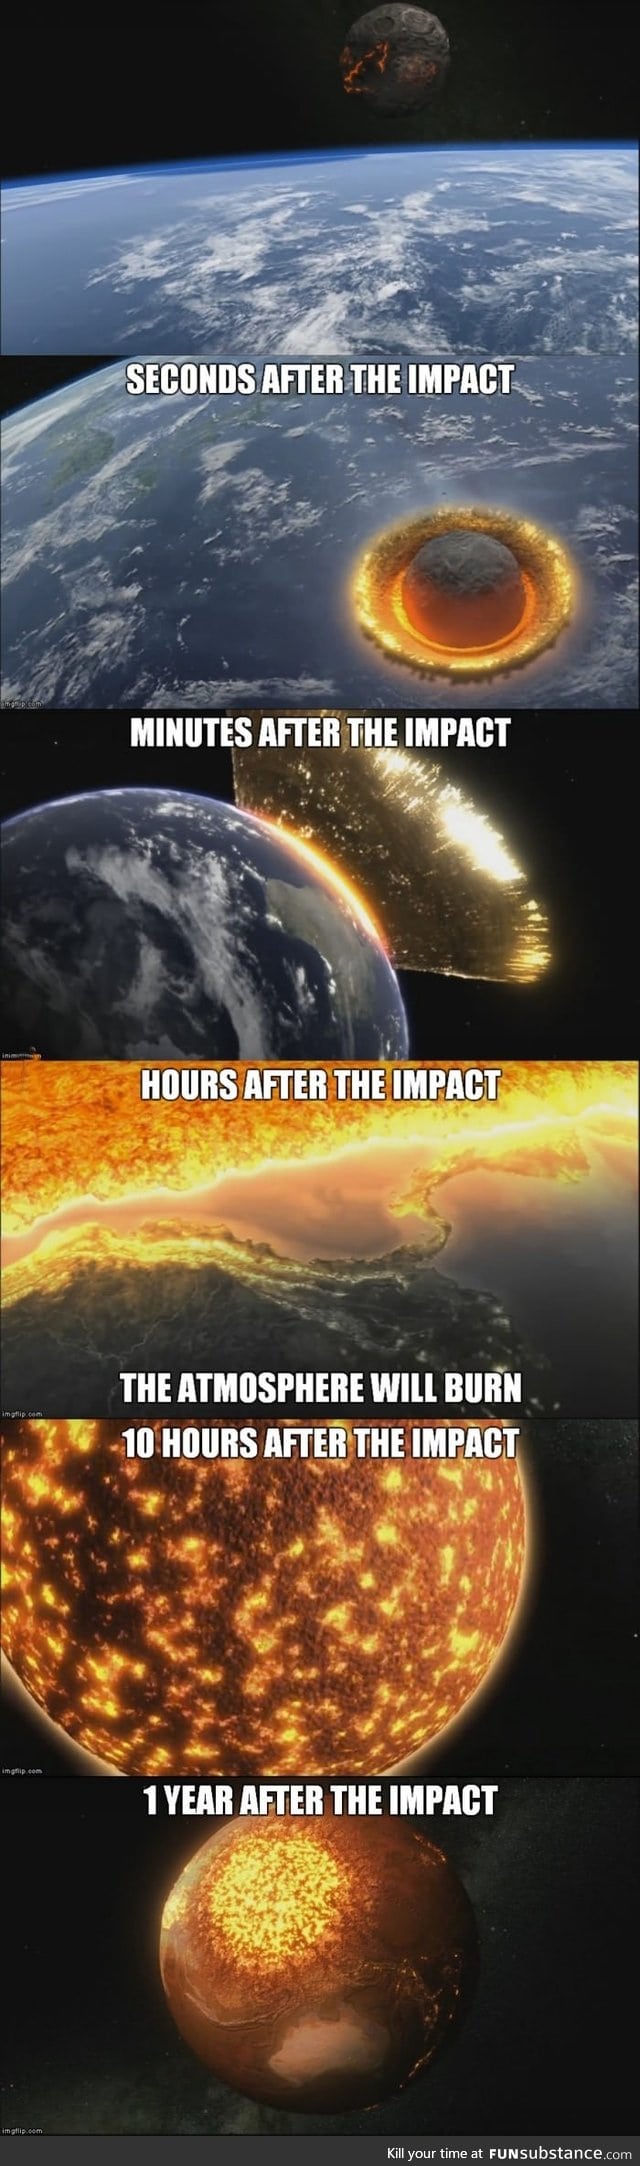 What will happen when a 500km asteriod hits Earth